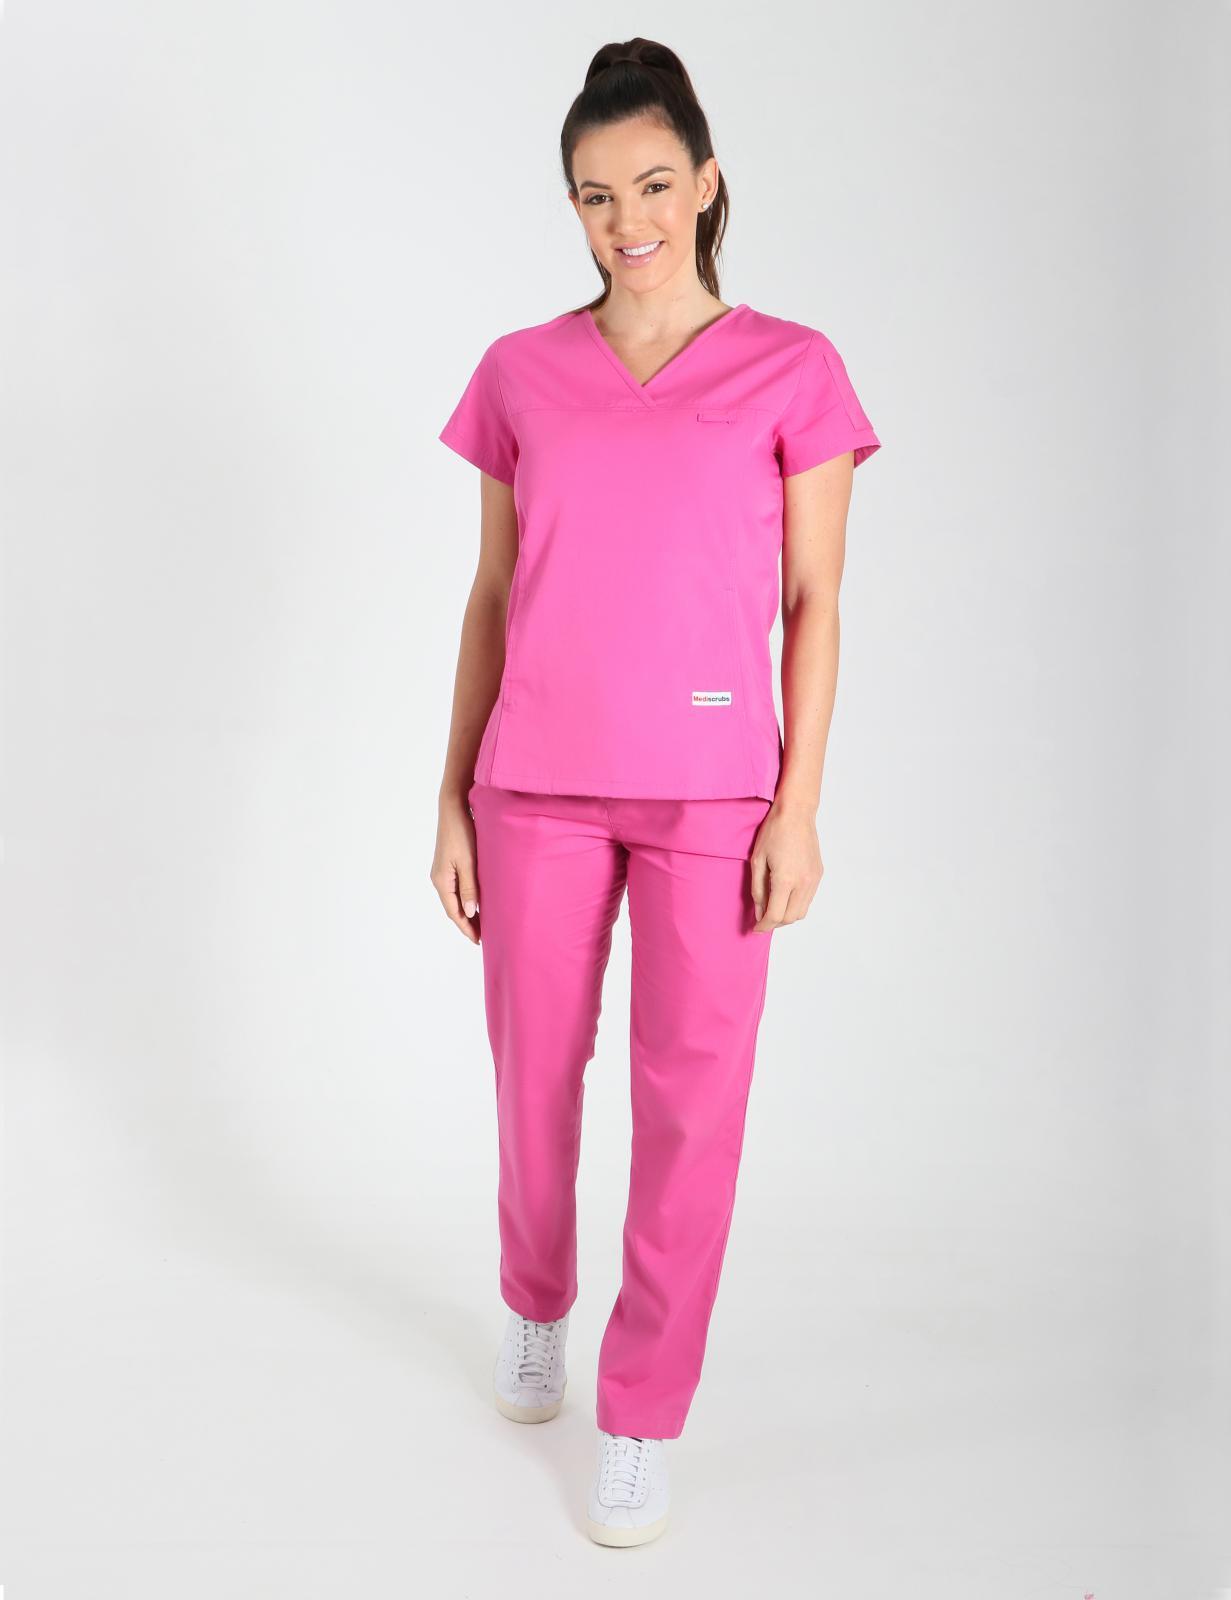 Women's Fit Solid Scrub Top - Pink - X Large